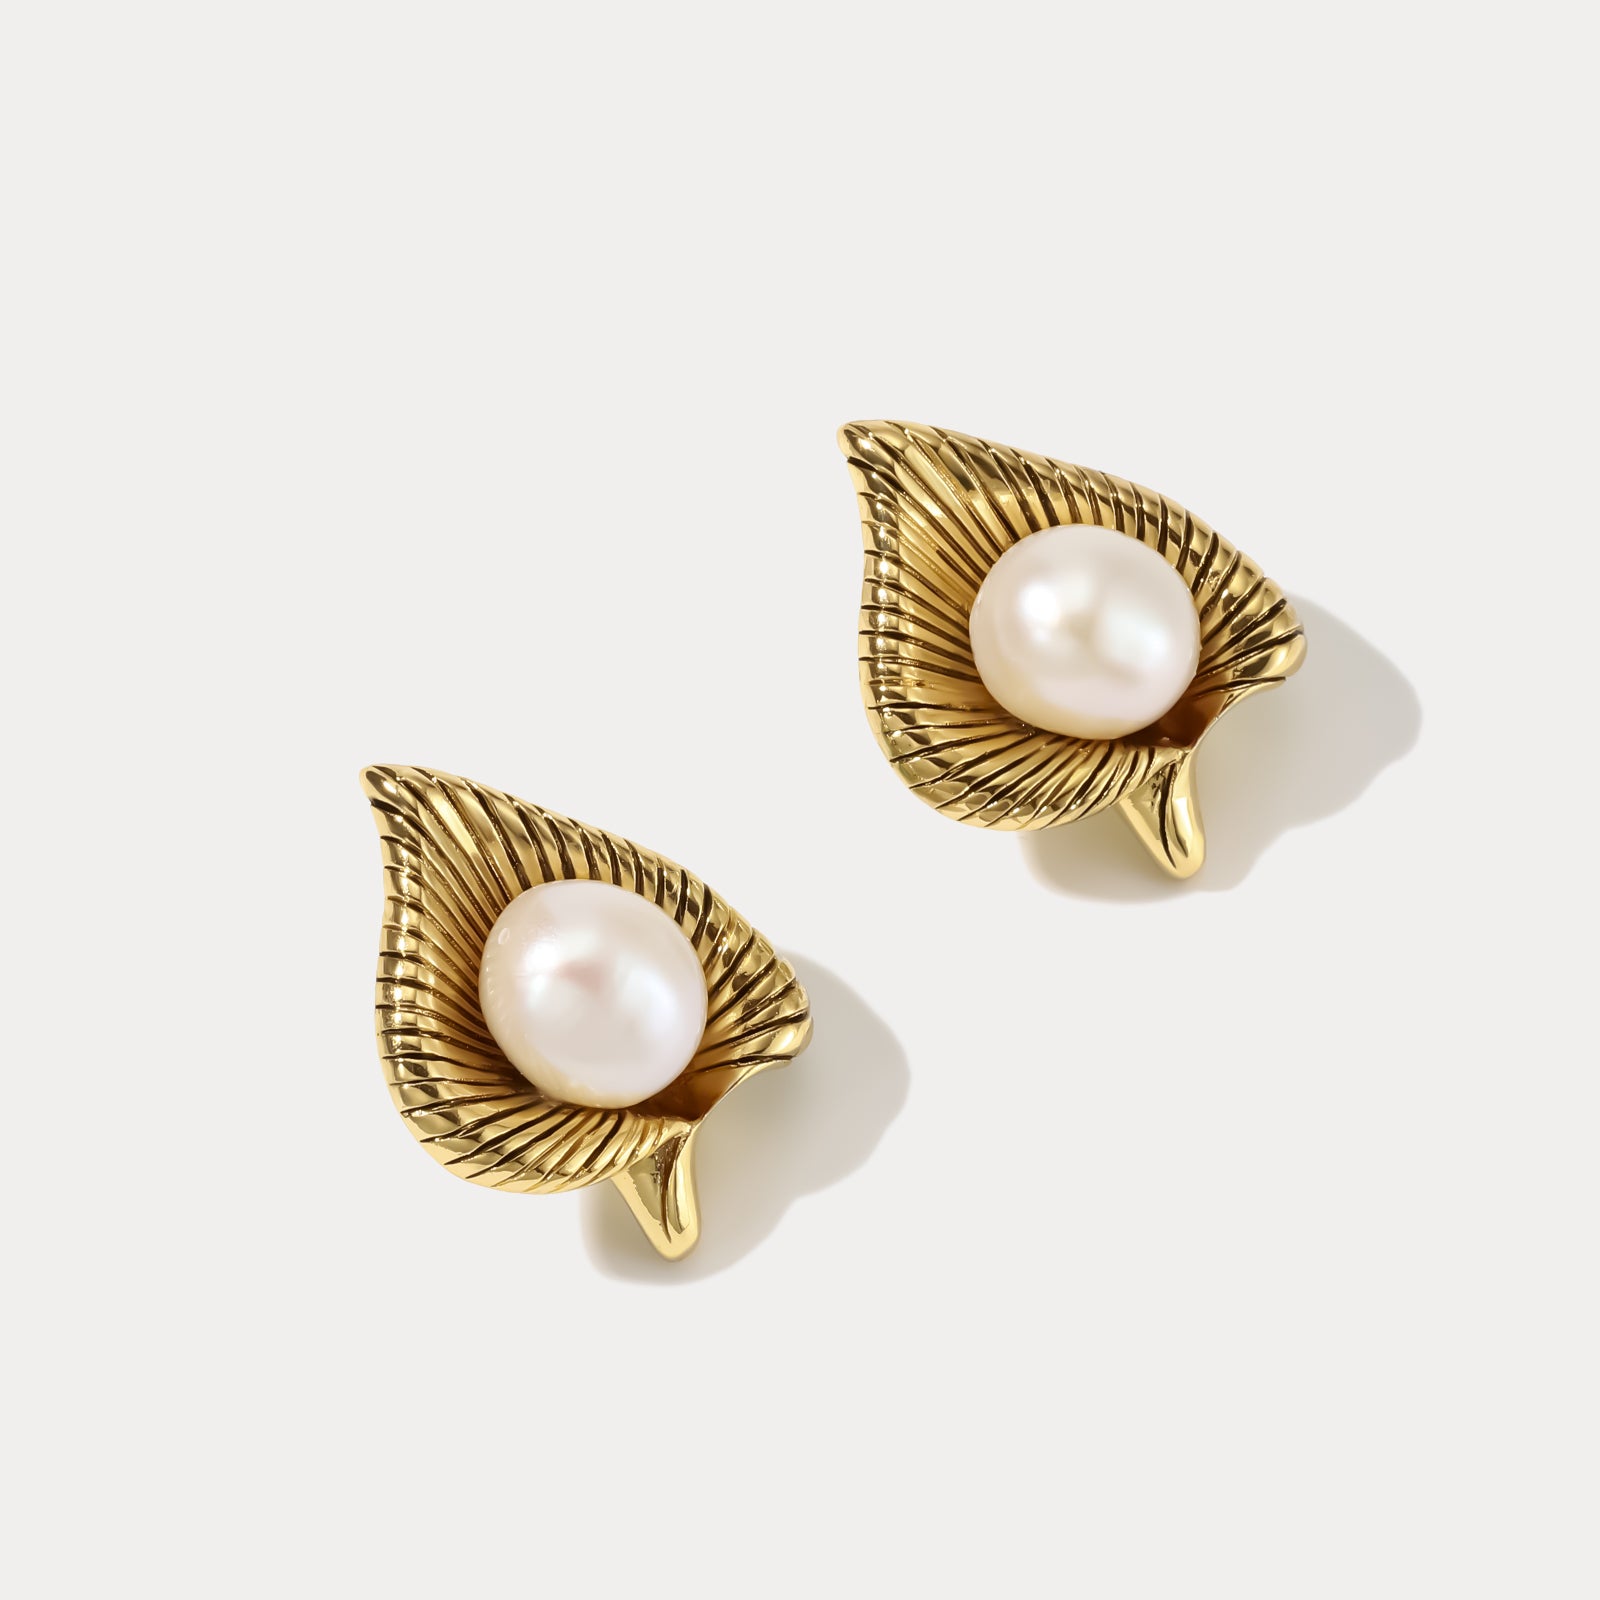 Antique Pearl Calla Lily Earrings